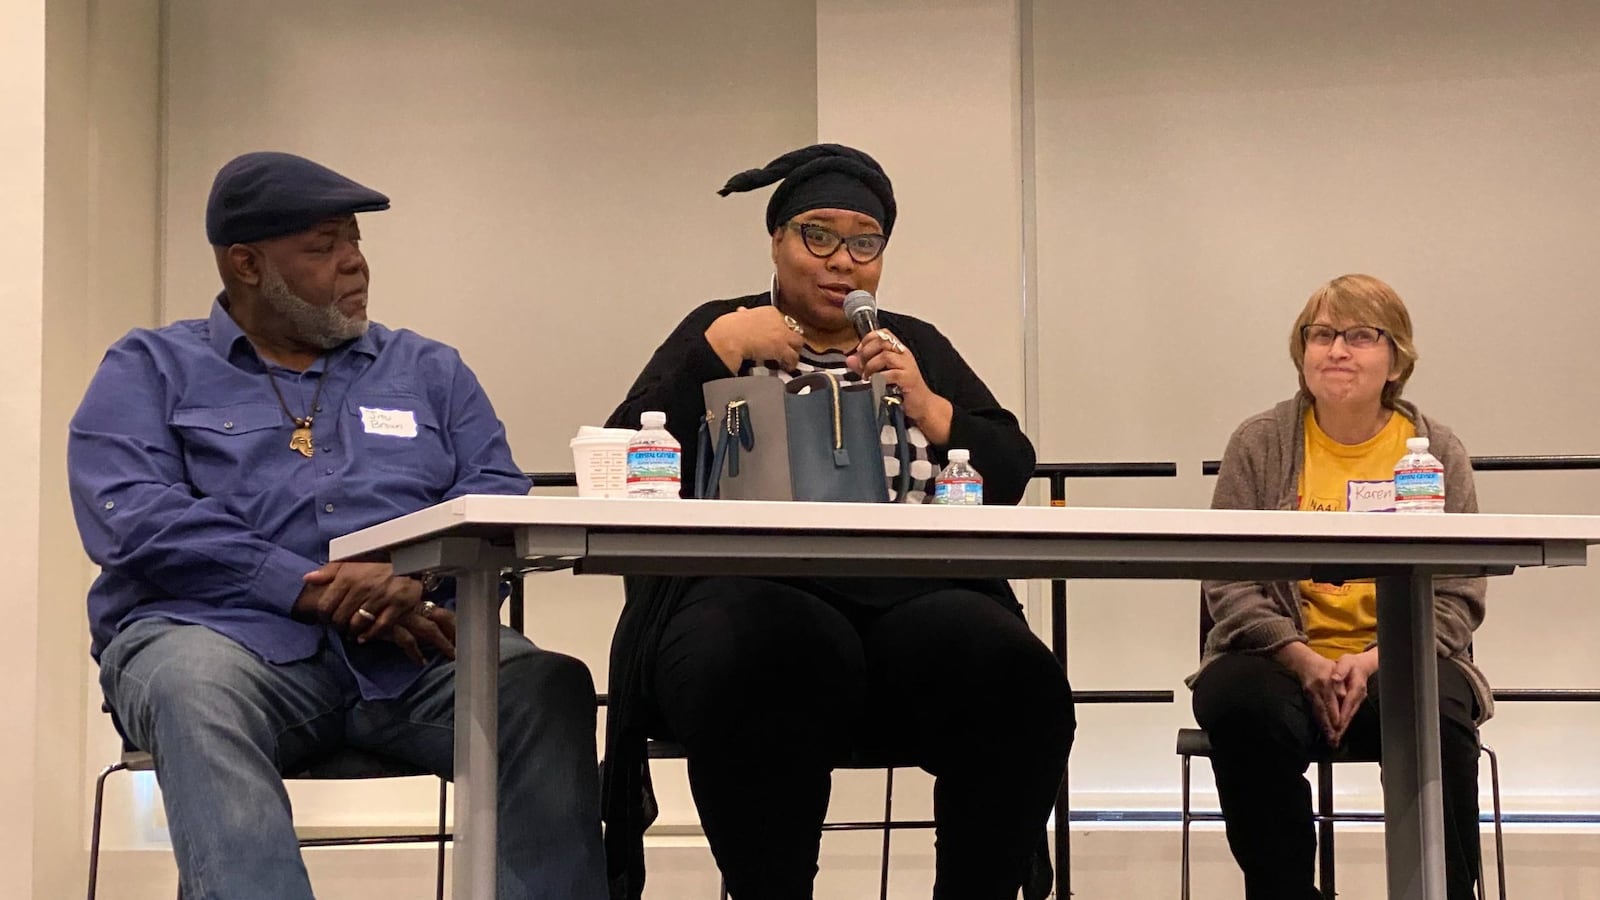 Jitu Brown, director of Journey 4 Justice; Alderman Jeanette Taylor of the 20th Ward; and Karen Zaccor of Northside Action for Justice and teacher at Uplift Community High School speak about the historic importance of Local School Councils, at a meeting Saturday at the Chicago teachers union offices.